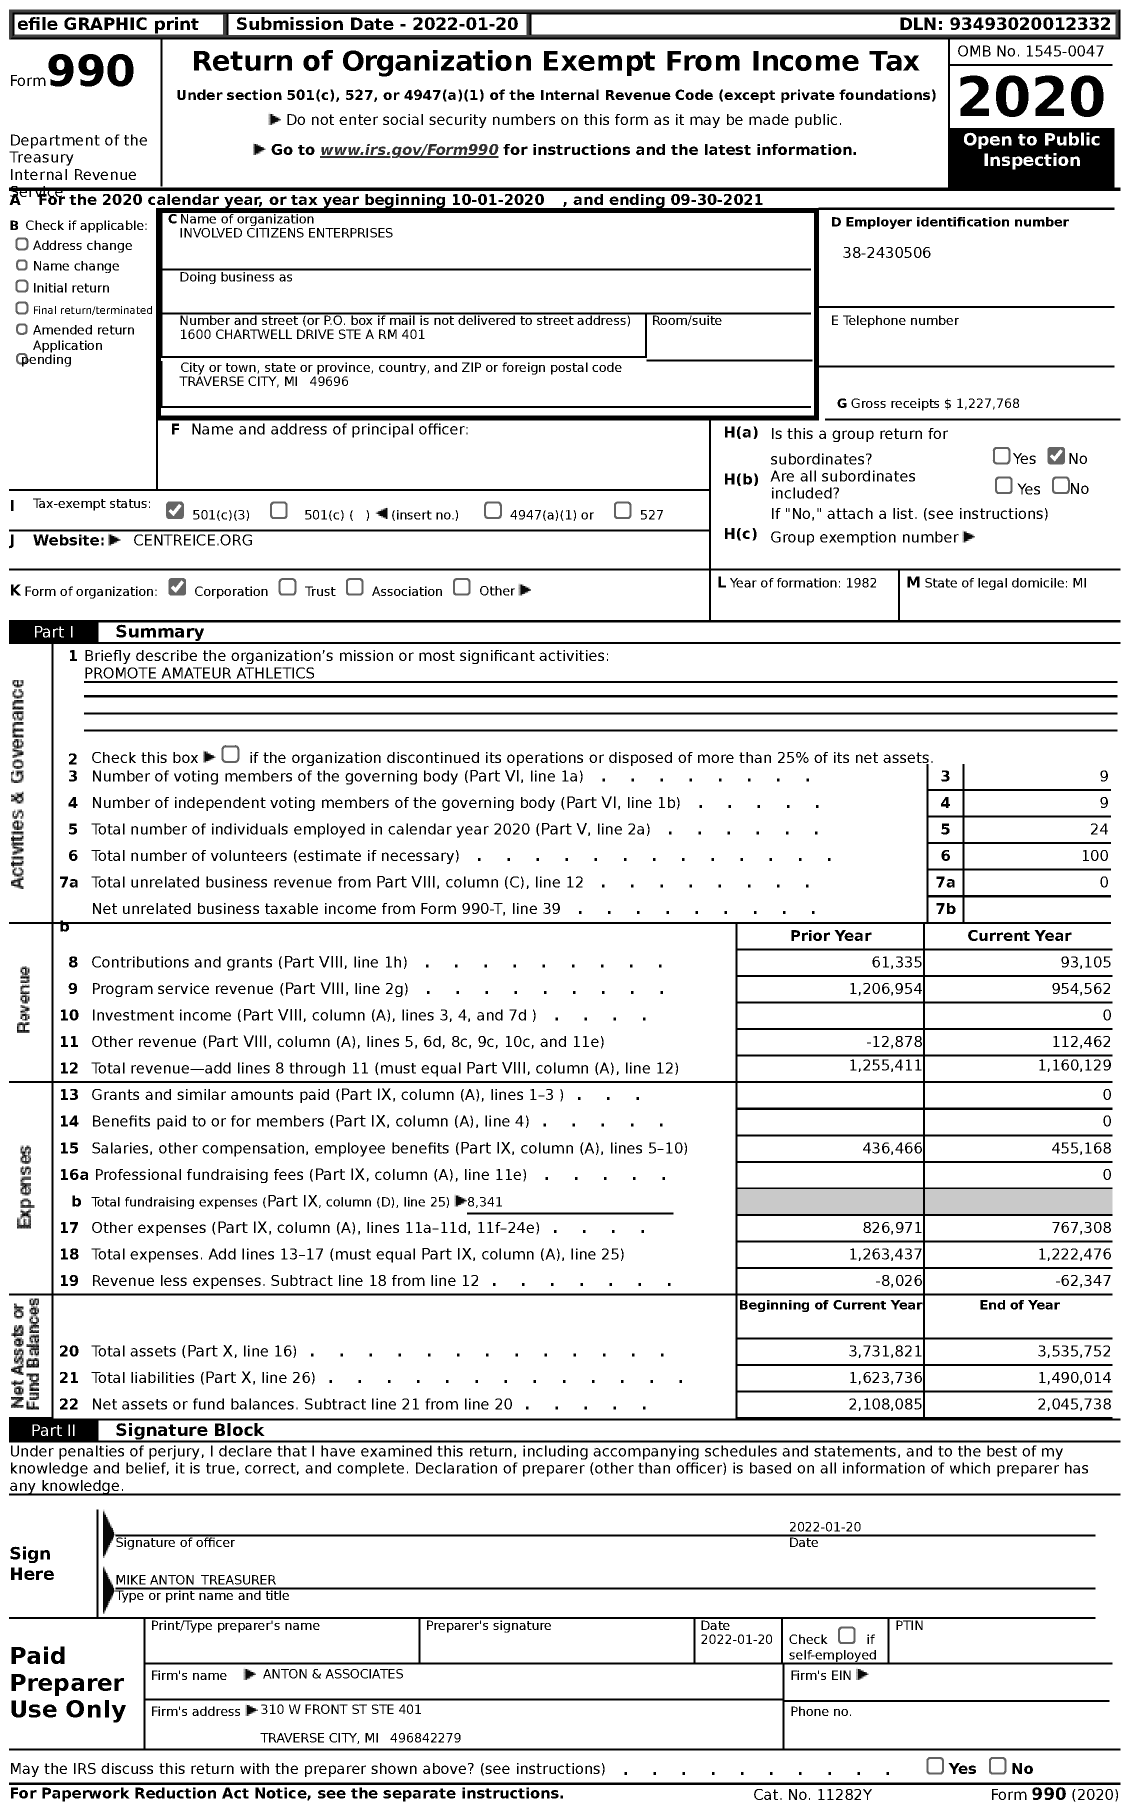 Image of first page of 2020 Form 990 for Involved Citizens Enterprises